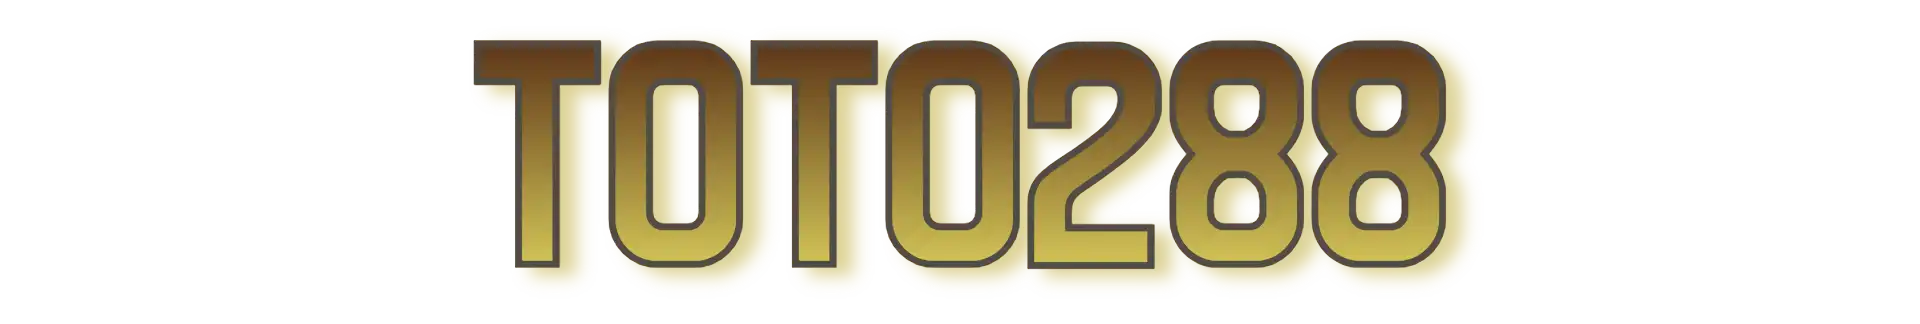 Toto288